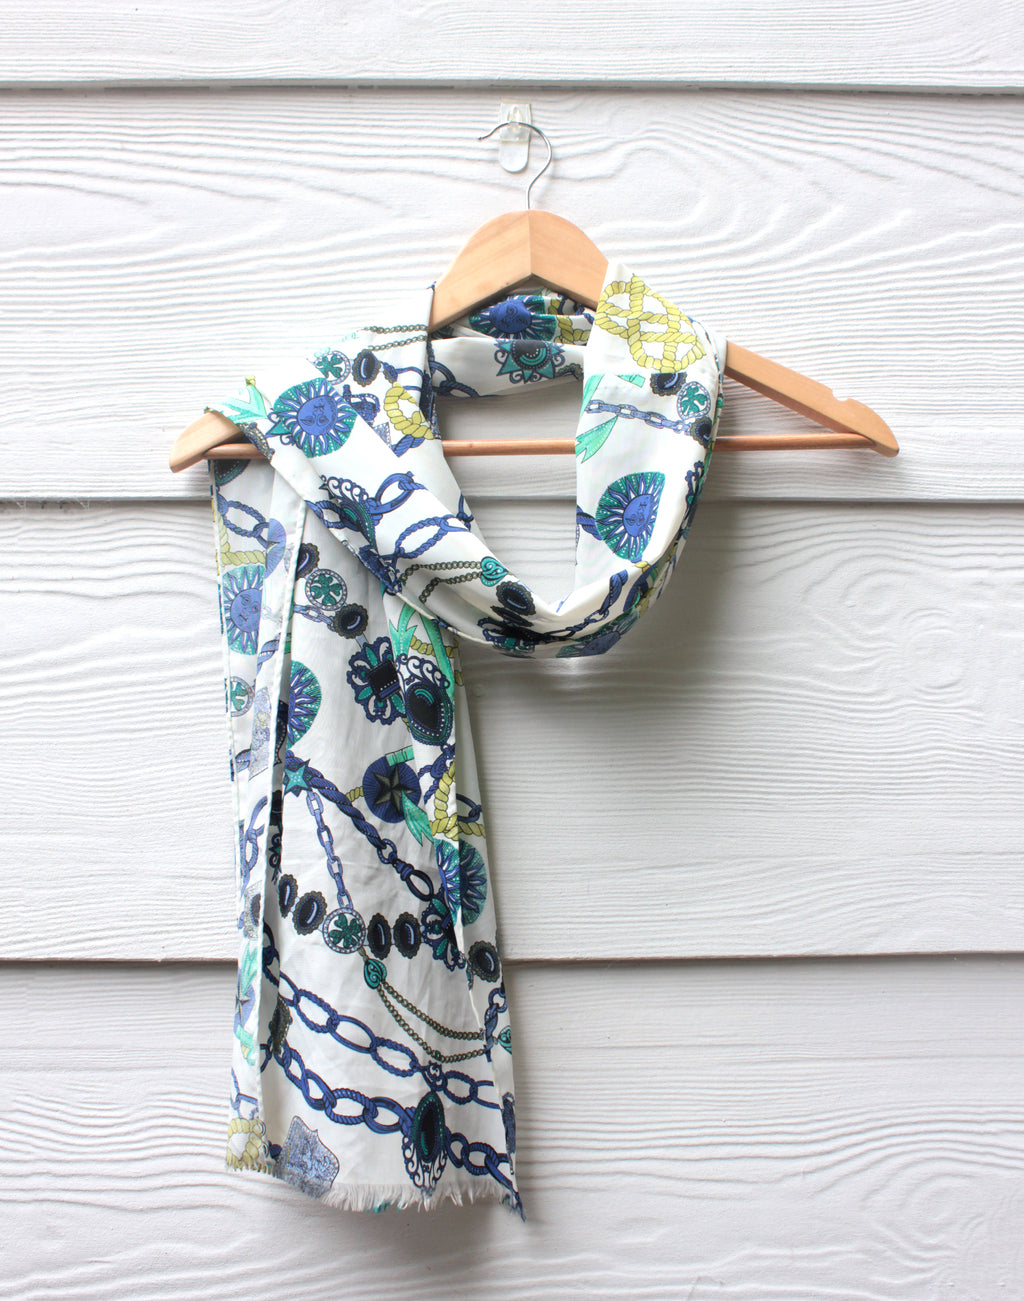 Nautical Blue and White Long Vintage Scarf